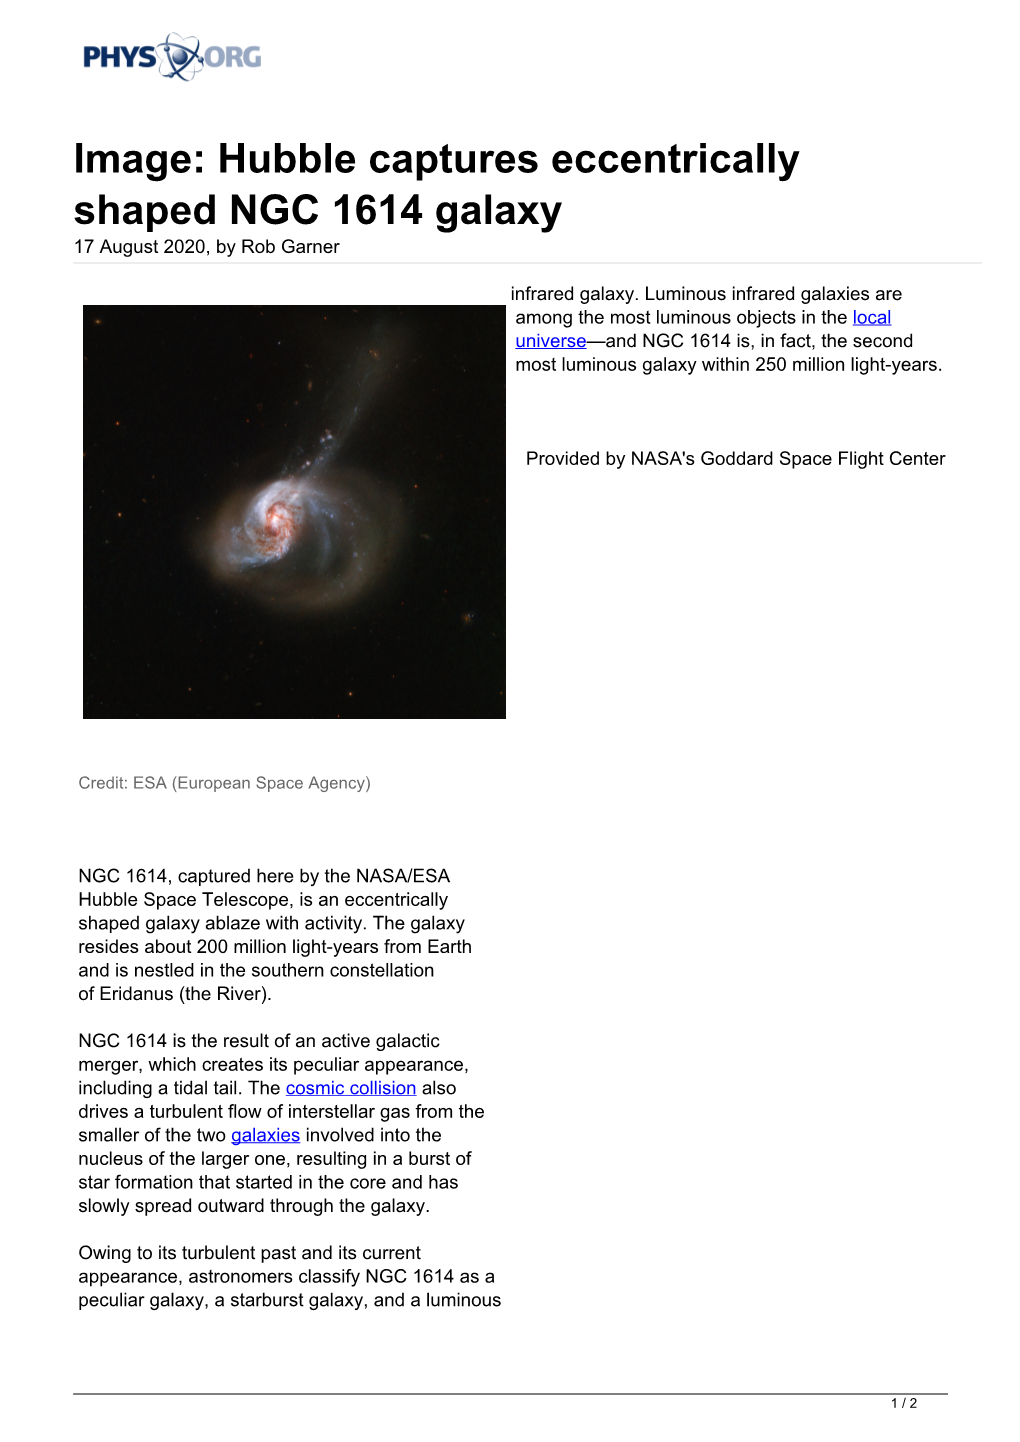 Hubble Captures Eccentrically Shaped NGC 1614 Galaxy 17 August 2020, by Rob Garner